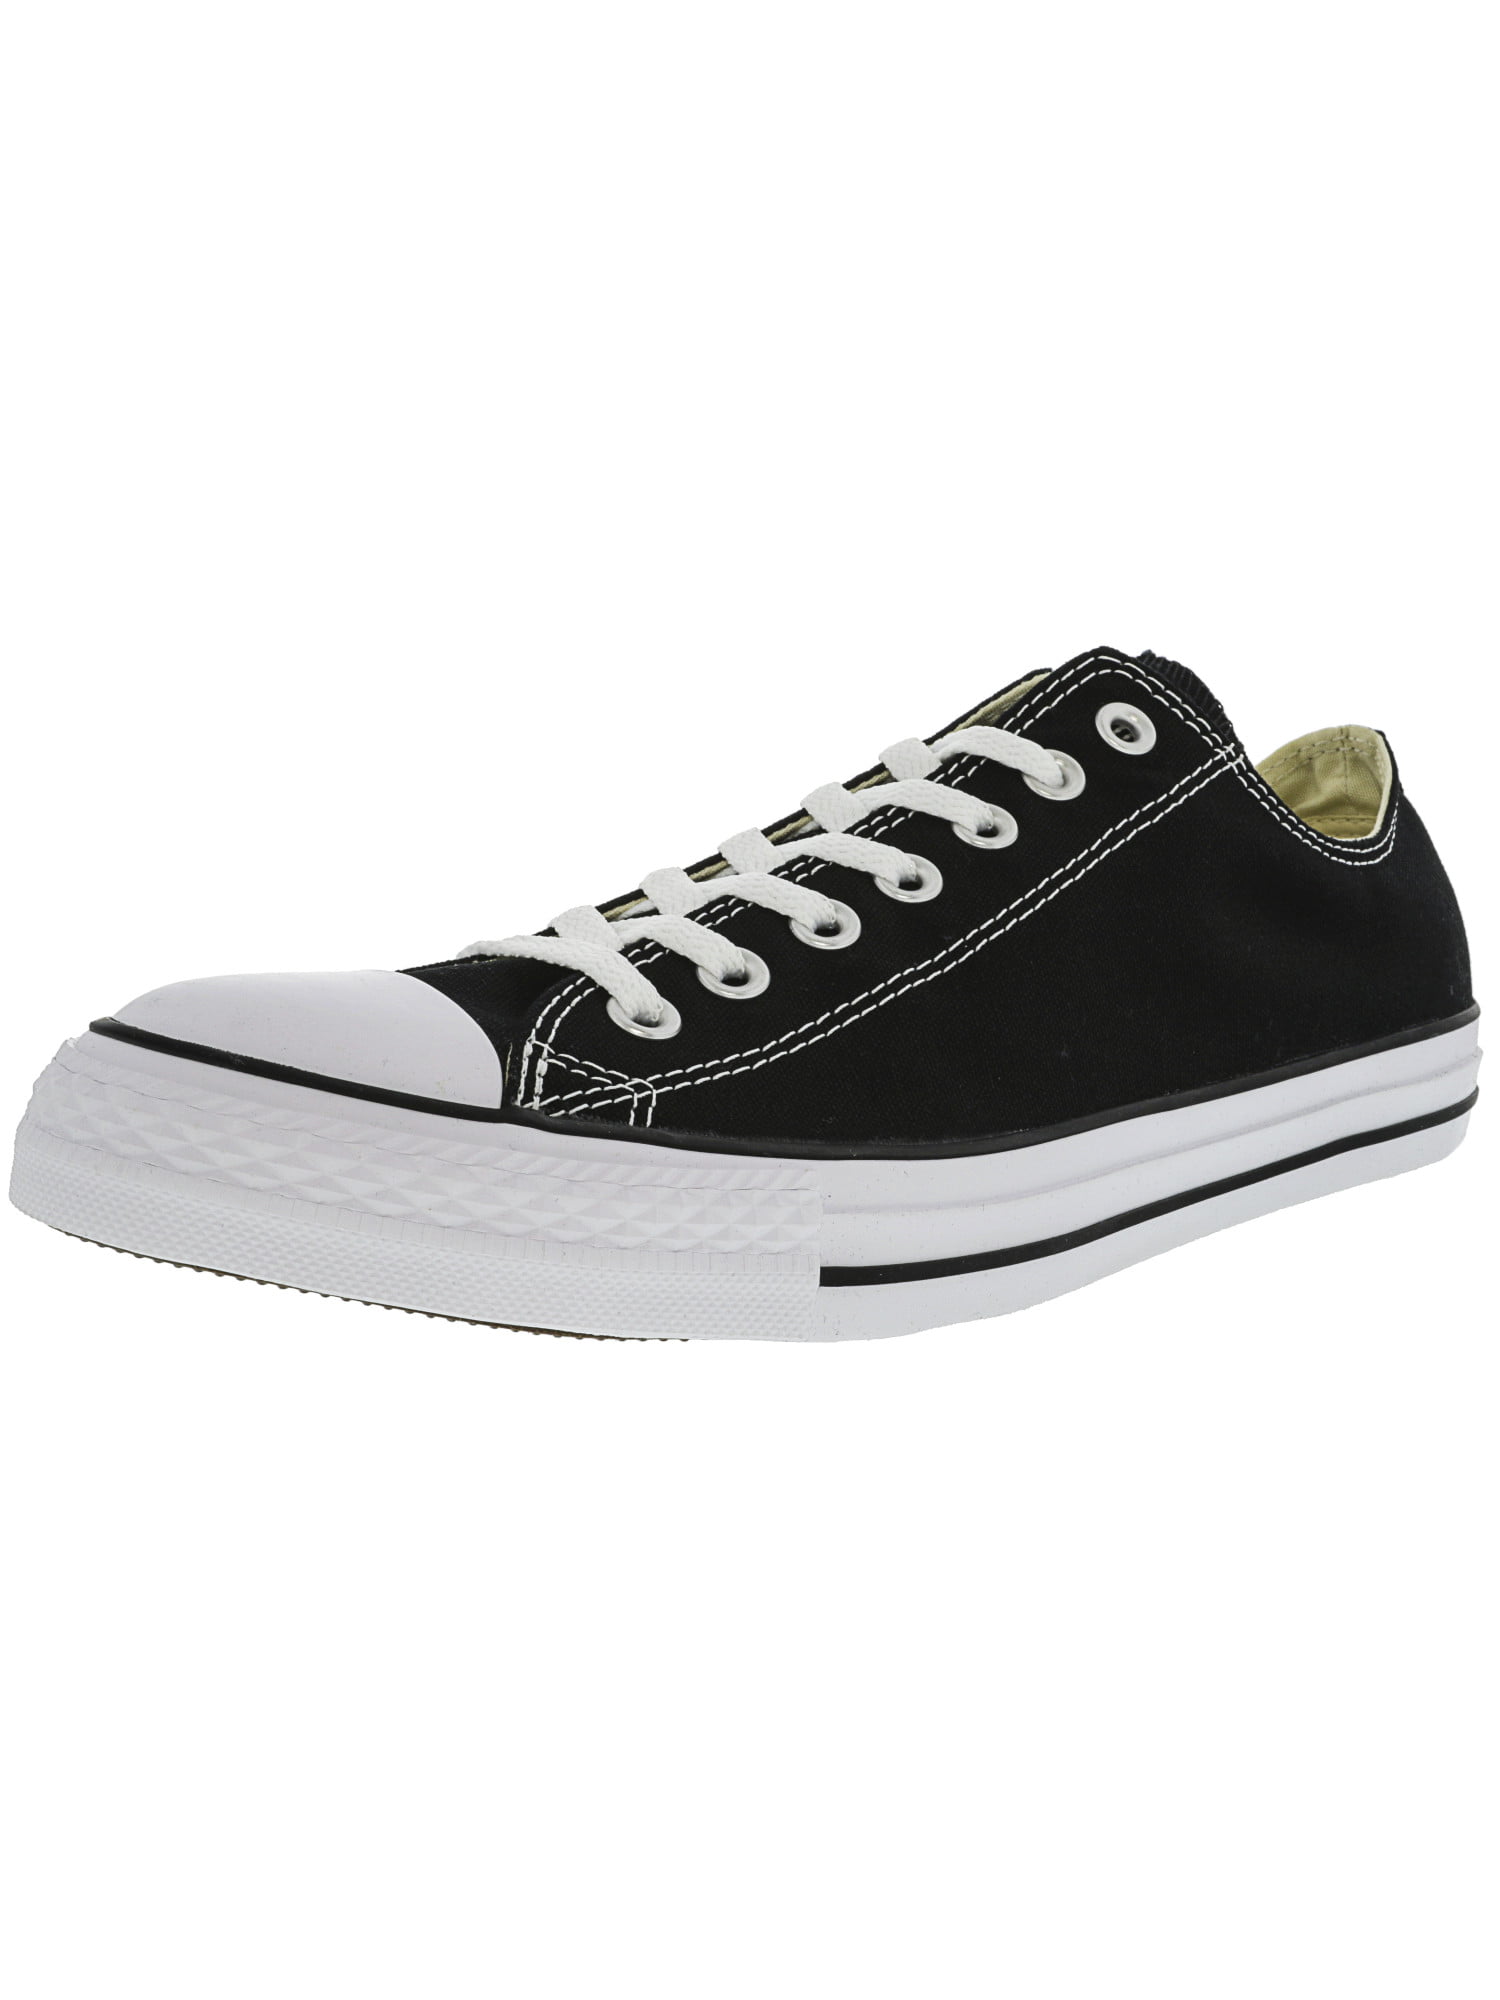 henvise røre ved baggrund Converse Chuck Taylor All Stars Ox Shoe - Charcoal - Walmart.com